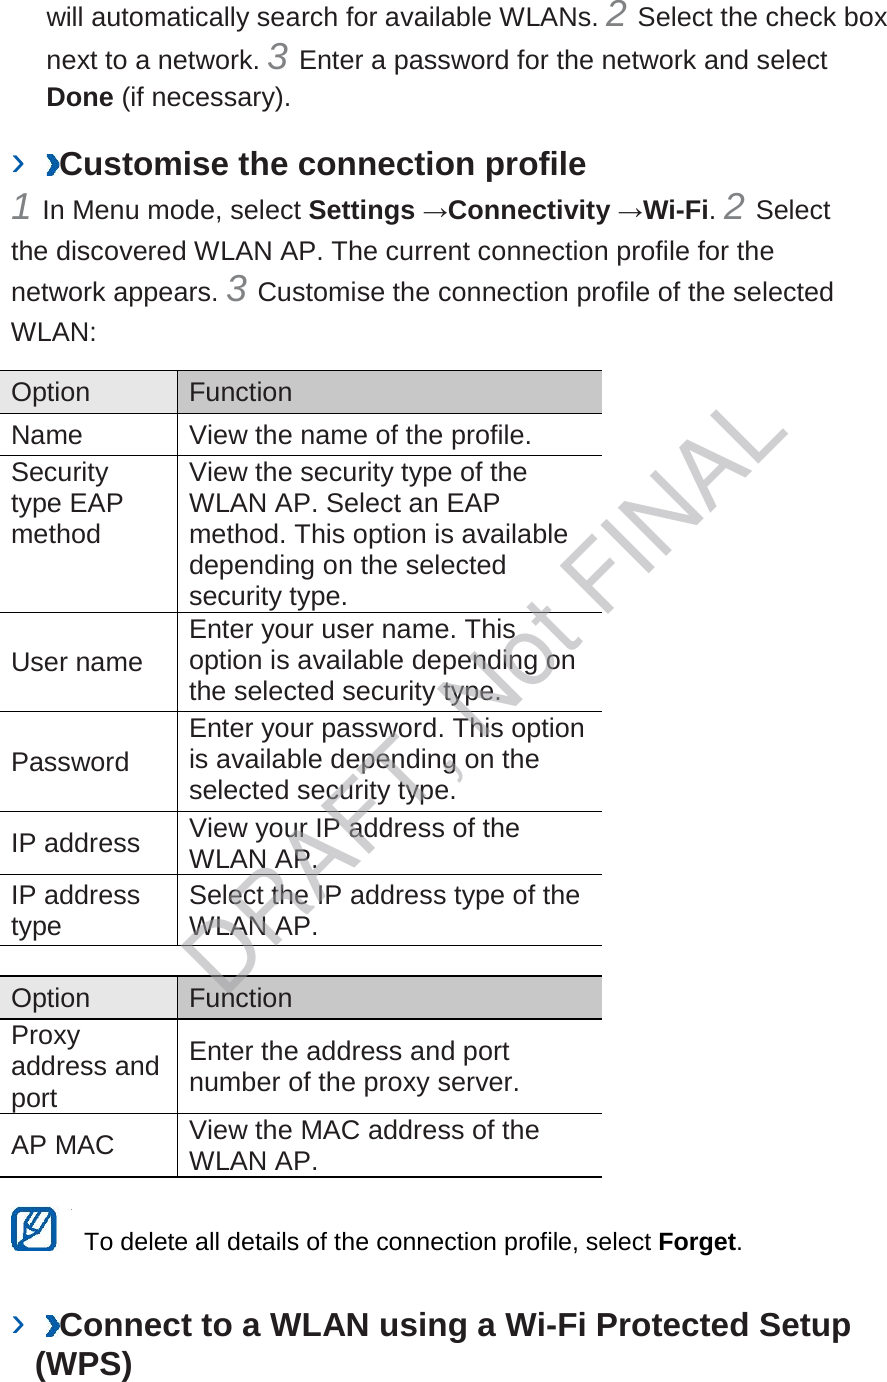 will automatically search for available WLANs. 2 Select the check box next to a network. 3 Enter a password for the network and select Done (if necessary).   ›  Customise the connection profile   1 In Menu mode, select Settings →Connectivity →Wi-Fi. 2 Select the discovered WLAN AP. The current connection profile for the network appears. 3 Customise the connection profile of the selected WLAN:   Option    Function   Name   View the name of the profile.   Security type EAP method   View the security type of the WLAN AP. Select an EAP method. This option is available depending on the selected security type.   User name   Enter your user name. This option is available depending on the selected security type.   Password   Enter your password. This option is available depending on the selected security type.   IP address   View your IP address of the WLAN AP.   IP address type   Select the IP address type of the WLAN AP.    Option    Function   Proxy address and port   Enter the address and port number of the proxy server.   AP MAC   View the MAC address of the WLAN AP.     To delete all details of the connection profile, select Forget.   ›  Connect to a WLAN using a Wi-Fi Protected Setup (WPS)   DRAFT, Not FINAL